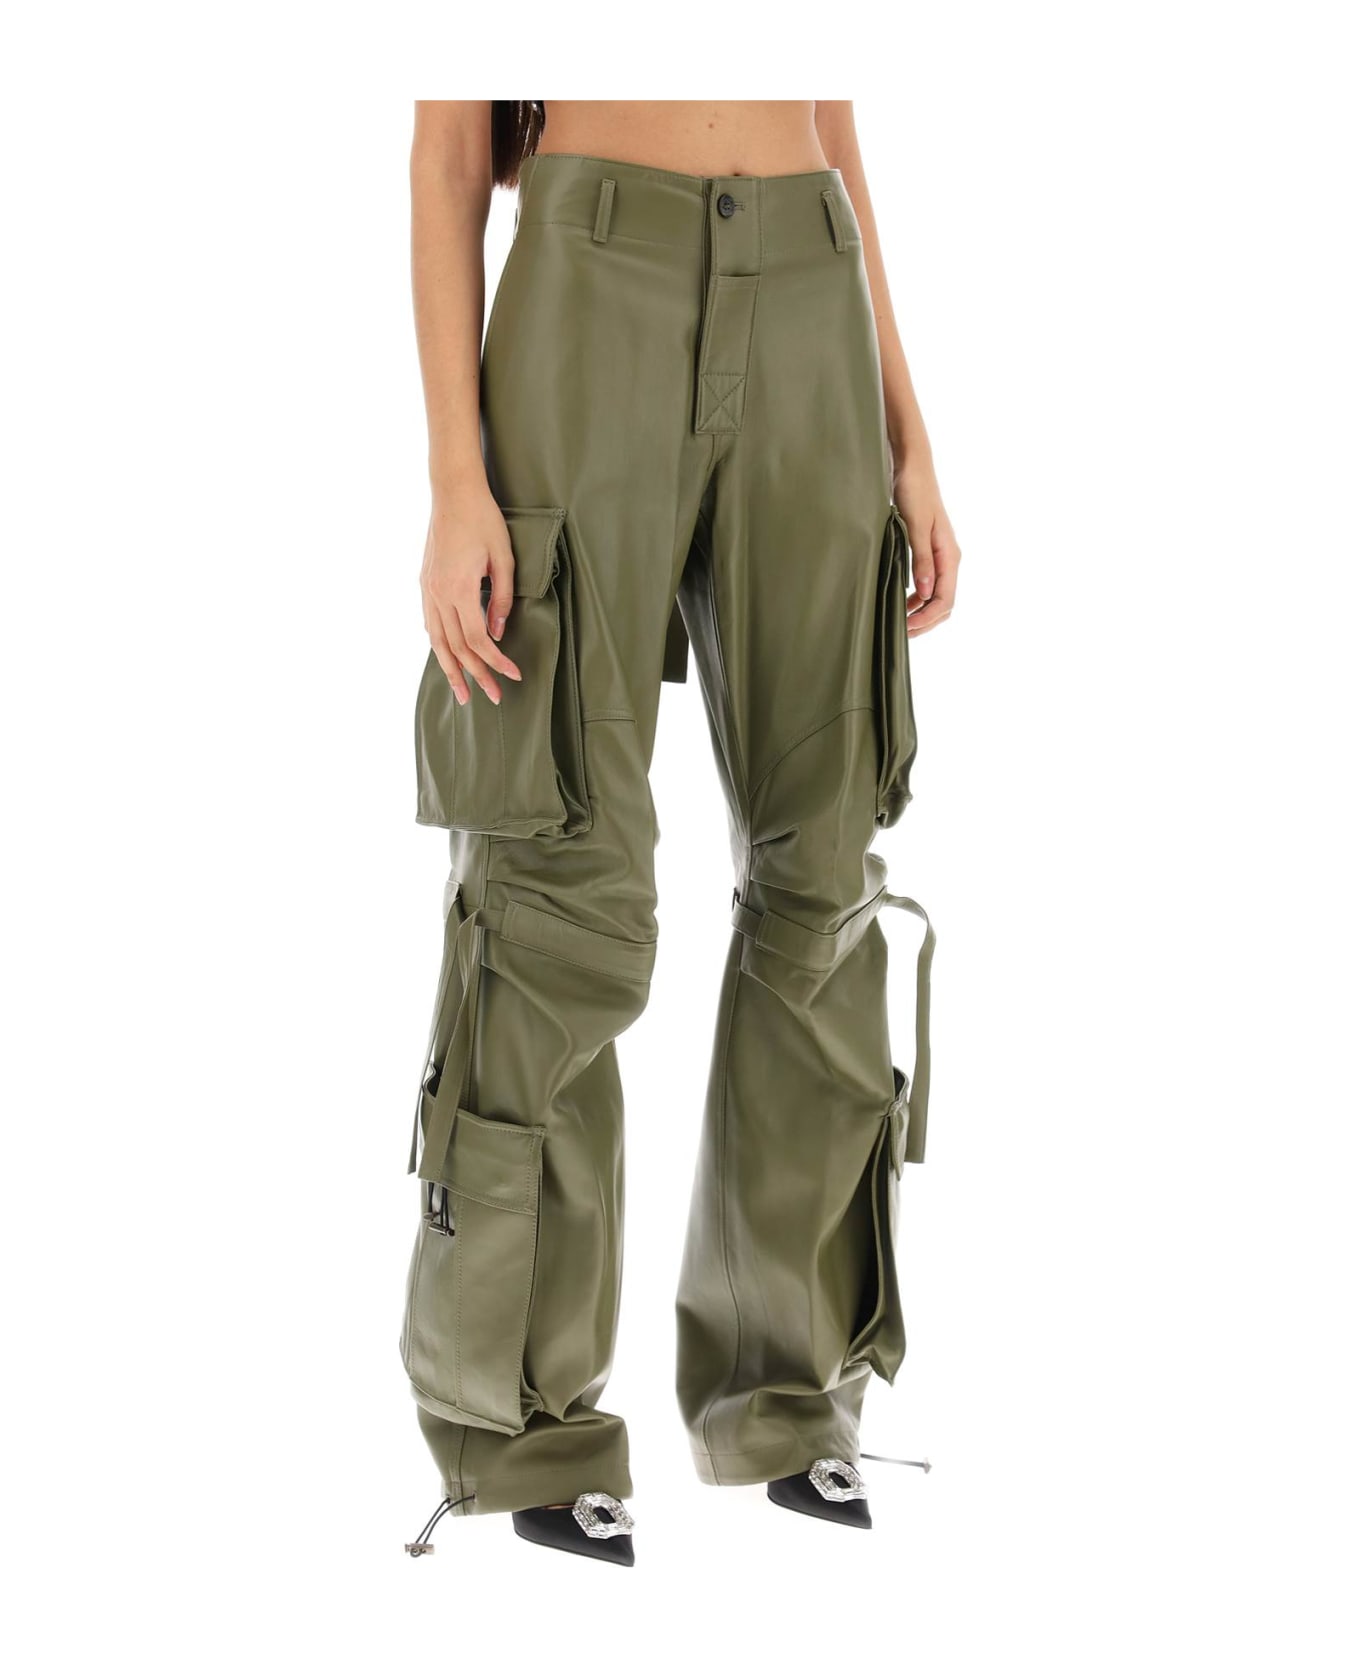 DARKPARK Lilly Cargo Pants In Nappa Leather - OLIVE (Khaki)